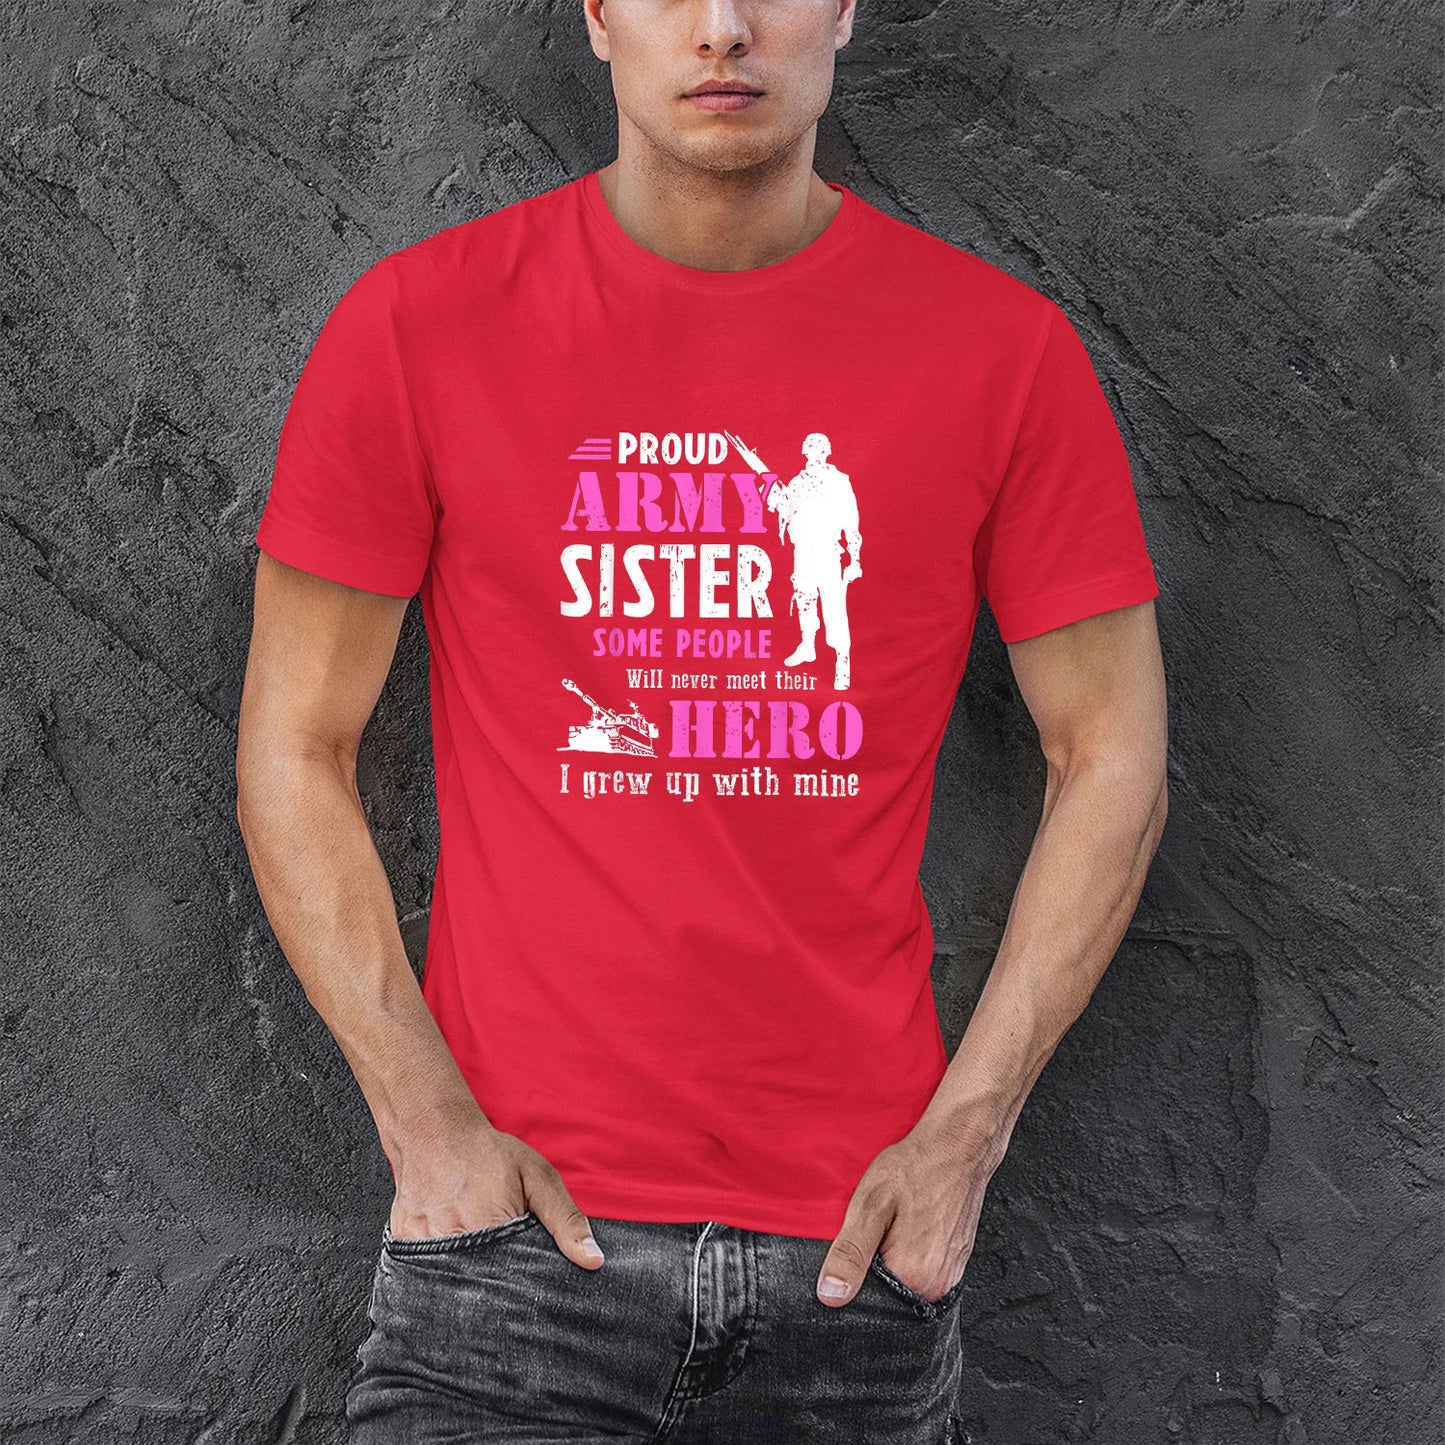 Memorial Day 2021 Proud Sister Of A Us Marine Shirt, Proud Army Sister Some People Never Meet Their Hero Shirt For Men, Cotton Shirt, Air Force Memorial Shirt, Usaf T Shirt